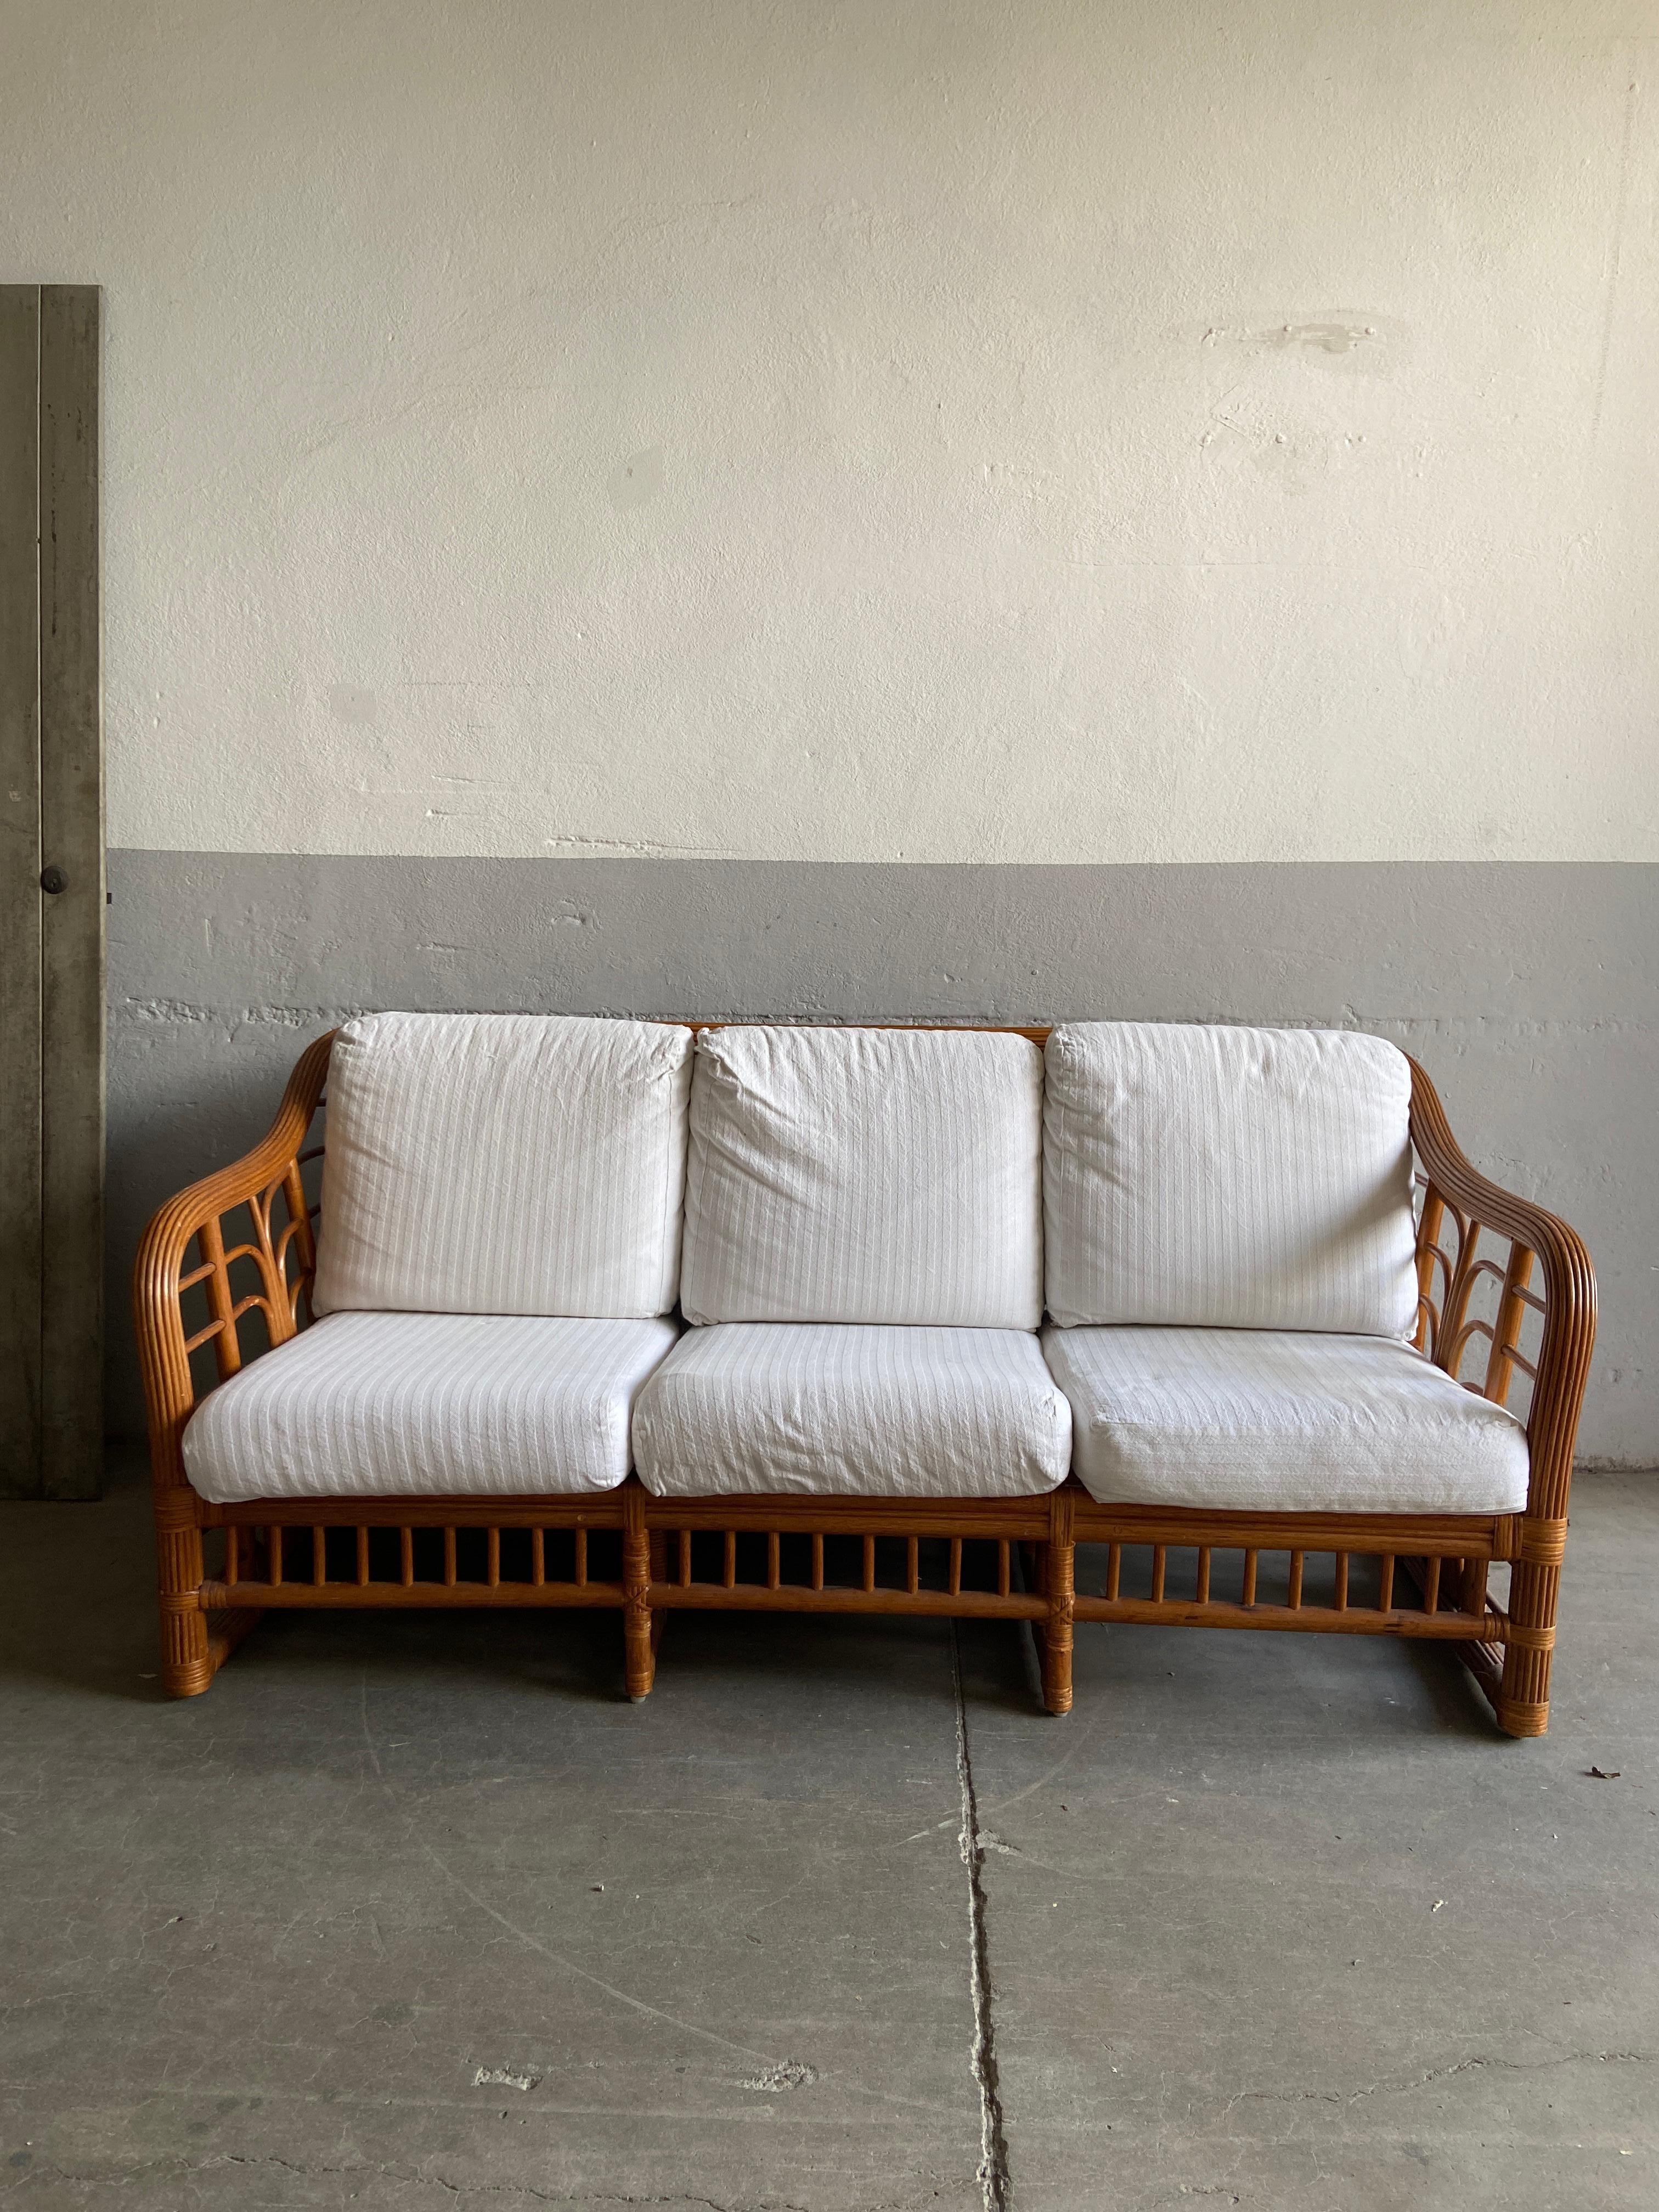 Mid-Century Modern Italian Bamboo sofa with its original cotton cushions by Vivai del Sud, 1970s
The sofa is in really good vintage condition, very stable and comfortable. The cushions are basic in white color and they can be covered with a more